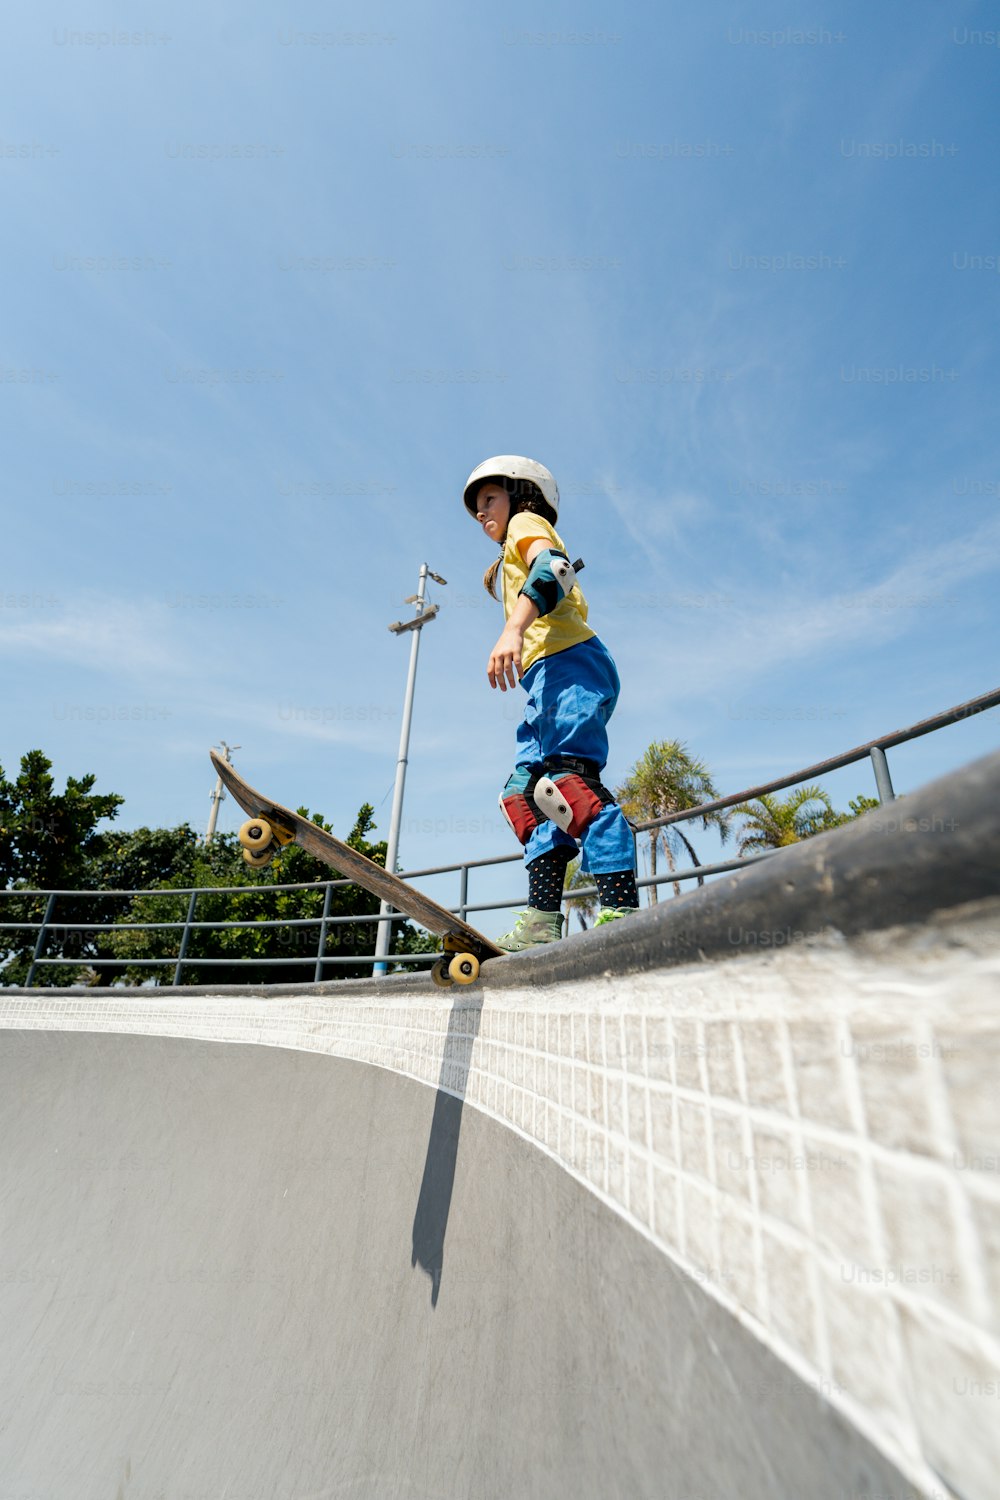 a young boy riding a skateboard up the side of a ramp